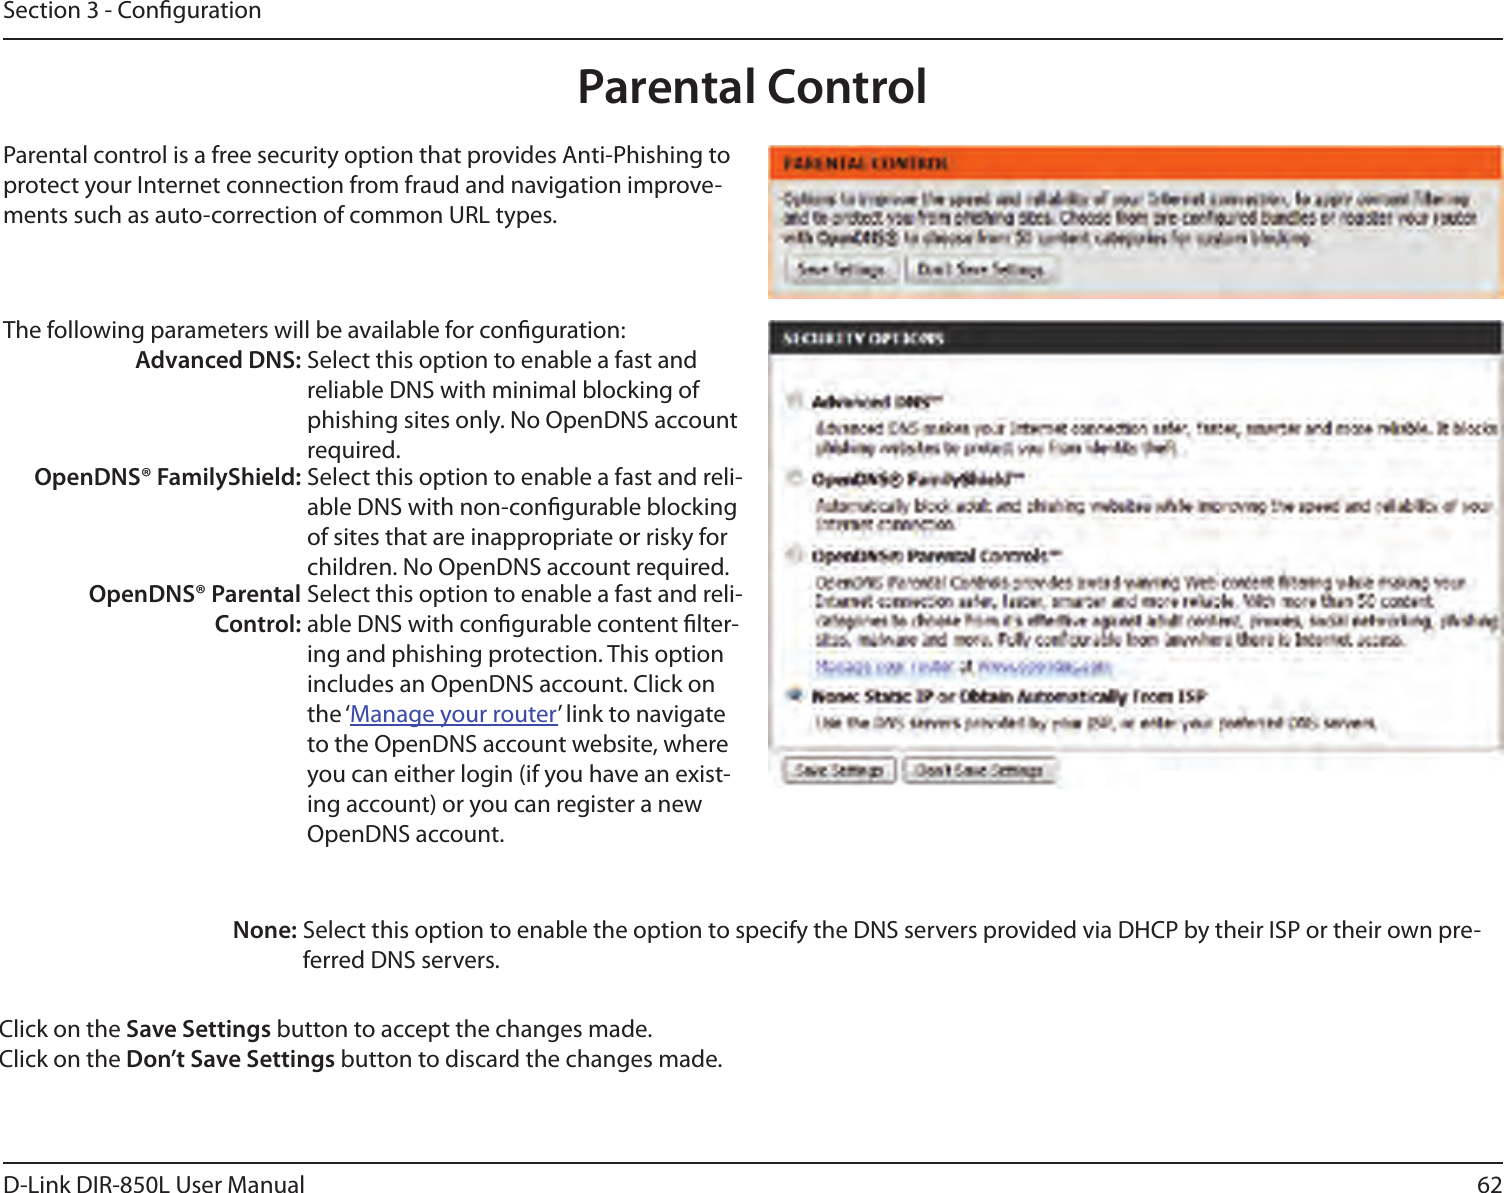 62D-Link DIR-850L User ManualSection 3 - CongurationParental ControlParental control is a free security option that provides Anti-Phishing to protect your Internet connection from fraud and navigation improve-ments such as auto-correction of common URL types.The following parameters will be available for conguration:Advanced DNS: Select this option to enable a fast and reliable DNS with minimal blocking of phishing sites only. No OpenDNS account required.OpenDNS® FamilyShield: Select this option to enable a fast and reli-able DNS with non-congurable blocking of sites that are inappropriate or risky for children. No OpenDNS account required.OpenDNS® Parental Control:Select this option to enable a fast and reli-able DNS with congurable content lter-ing and phishing protection. This option includes an OpenDNS account. Click on the ‘Manage your router’ link to navigate to the OpenDNS account website, where you can either login (if you have an exist-ing account) or you can register a new OpenDNS account. None: Select this option to enable the option to specify the DNS servers provided via DHCP by their ISP or their own pre-ferred DNS servers.Click on the Save Settings button to accept the changes made.Click on the Don’t Save Settings button to discard the changes made.